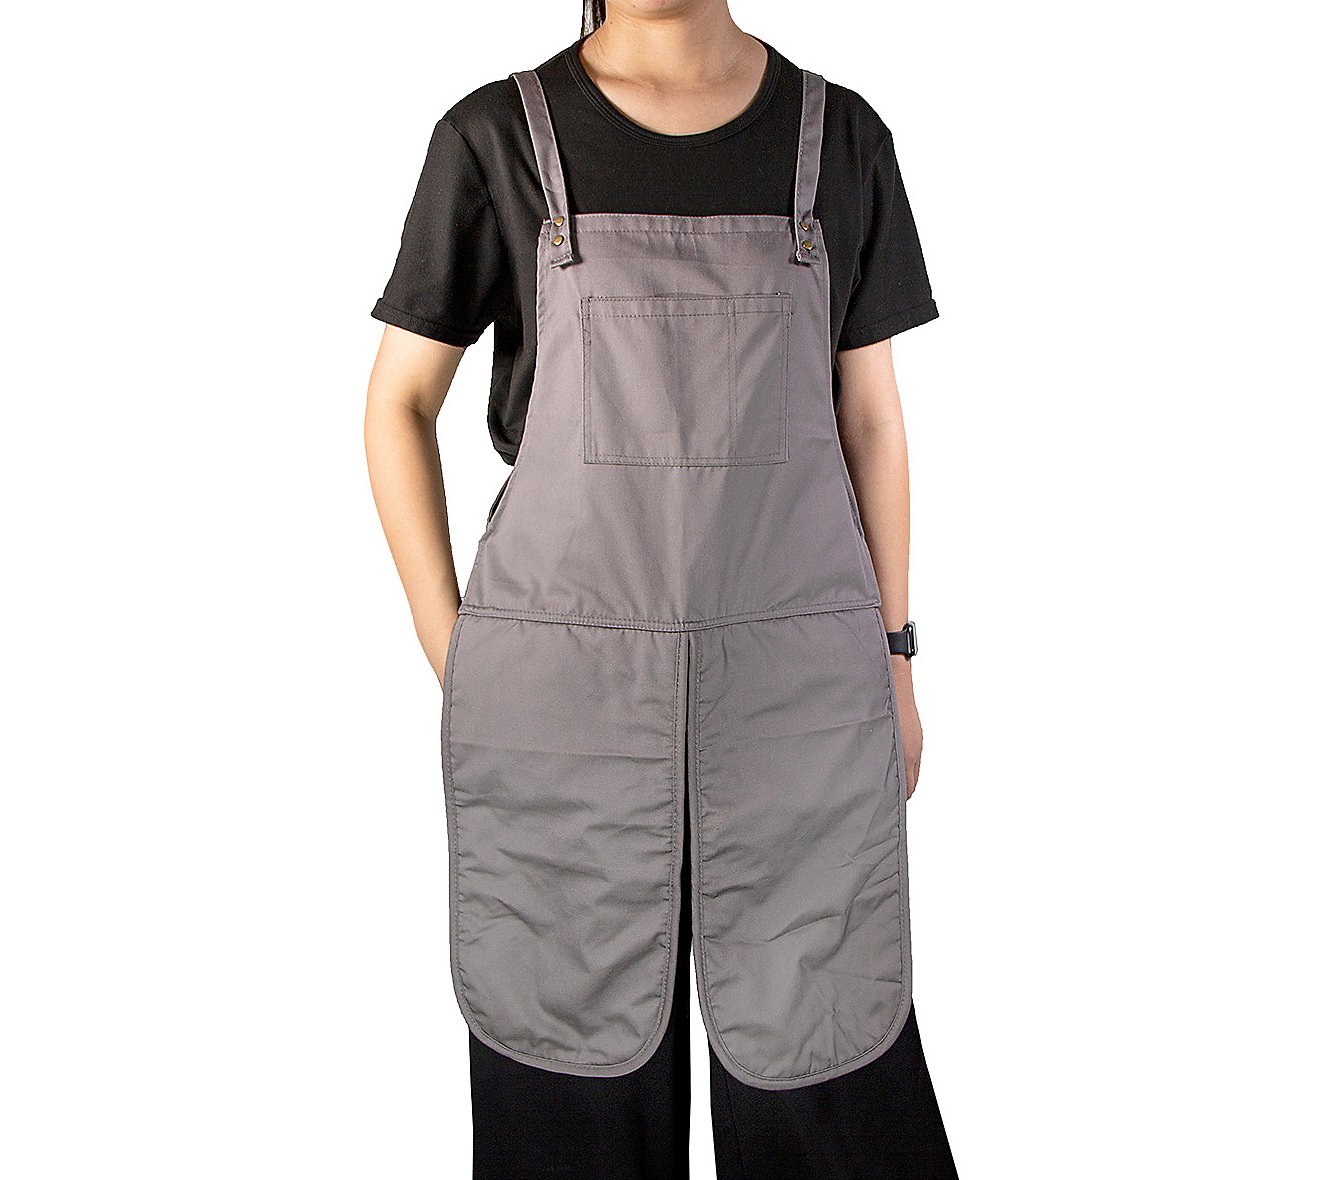 Grand Fusion Apron with Built-in Oven Mitts